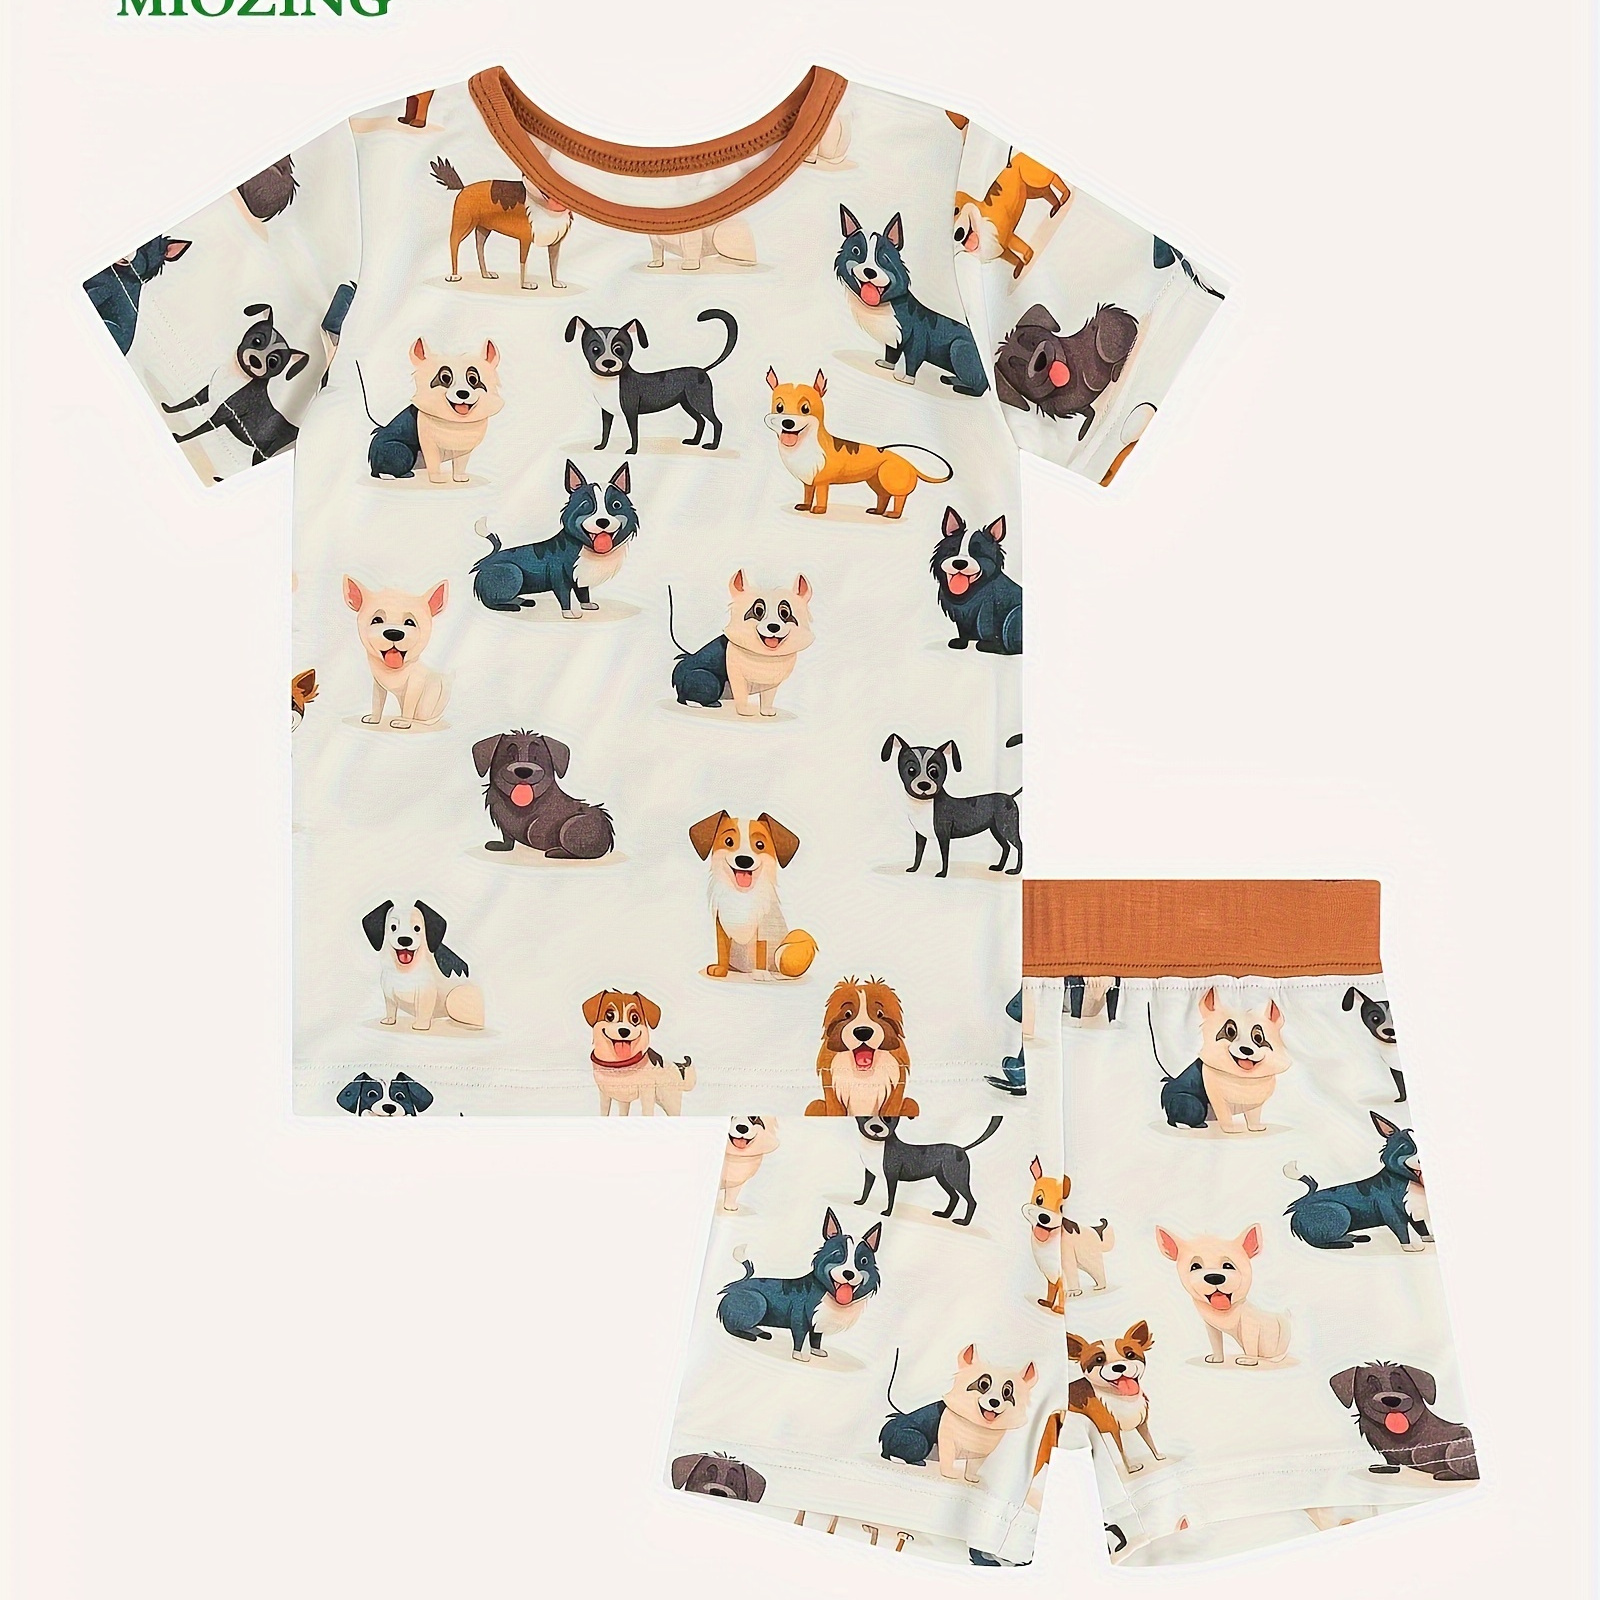 

Miozing Bamboo Fiber 2pcs, Toddler Kid's T-shirt & Comfy Shorts, Cartoon Lovely Puppy Pattern Set, Baby Girl's Clothes